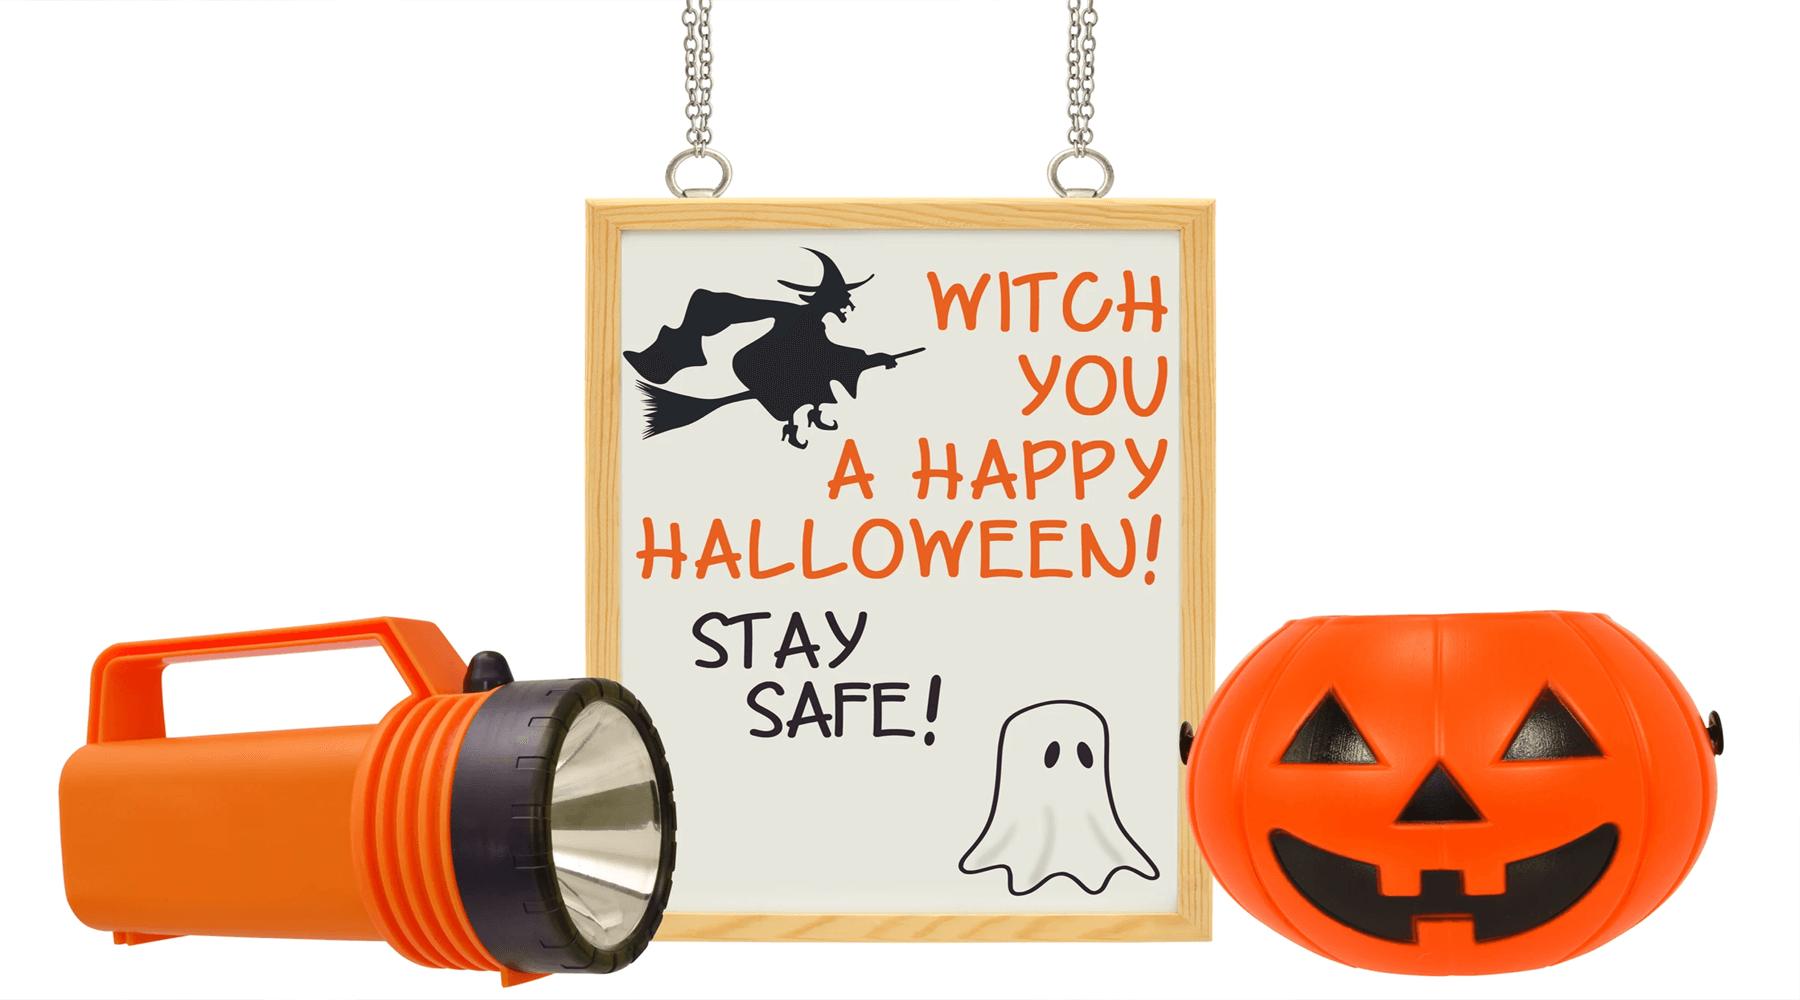 Simple Safety Tips for Halloween